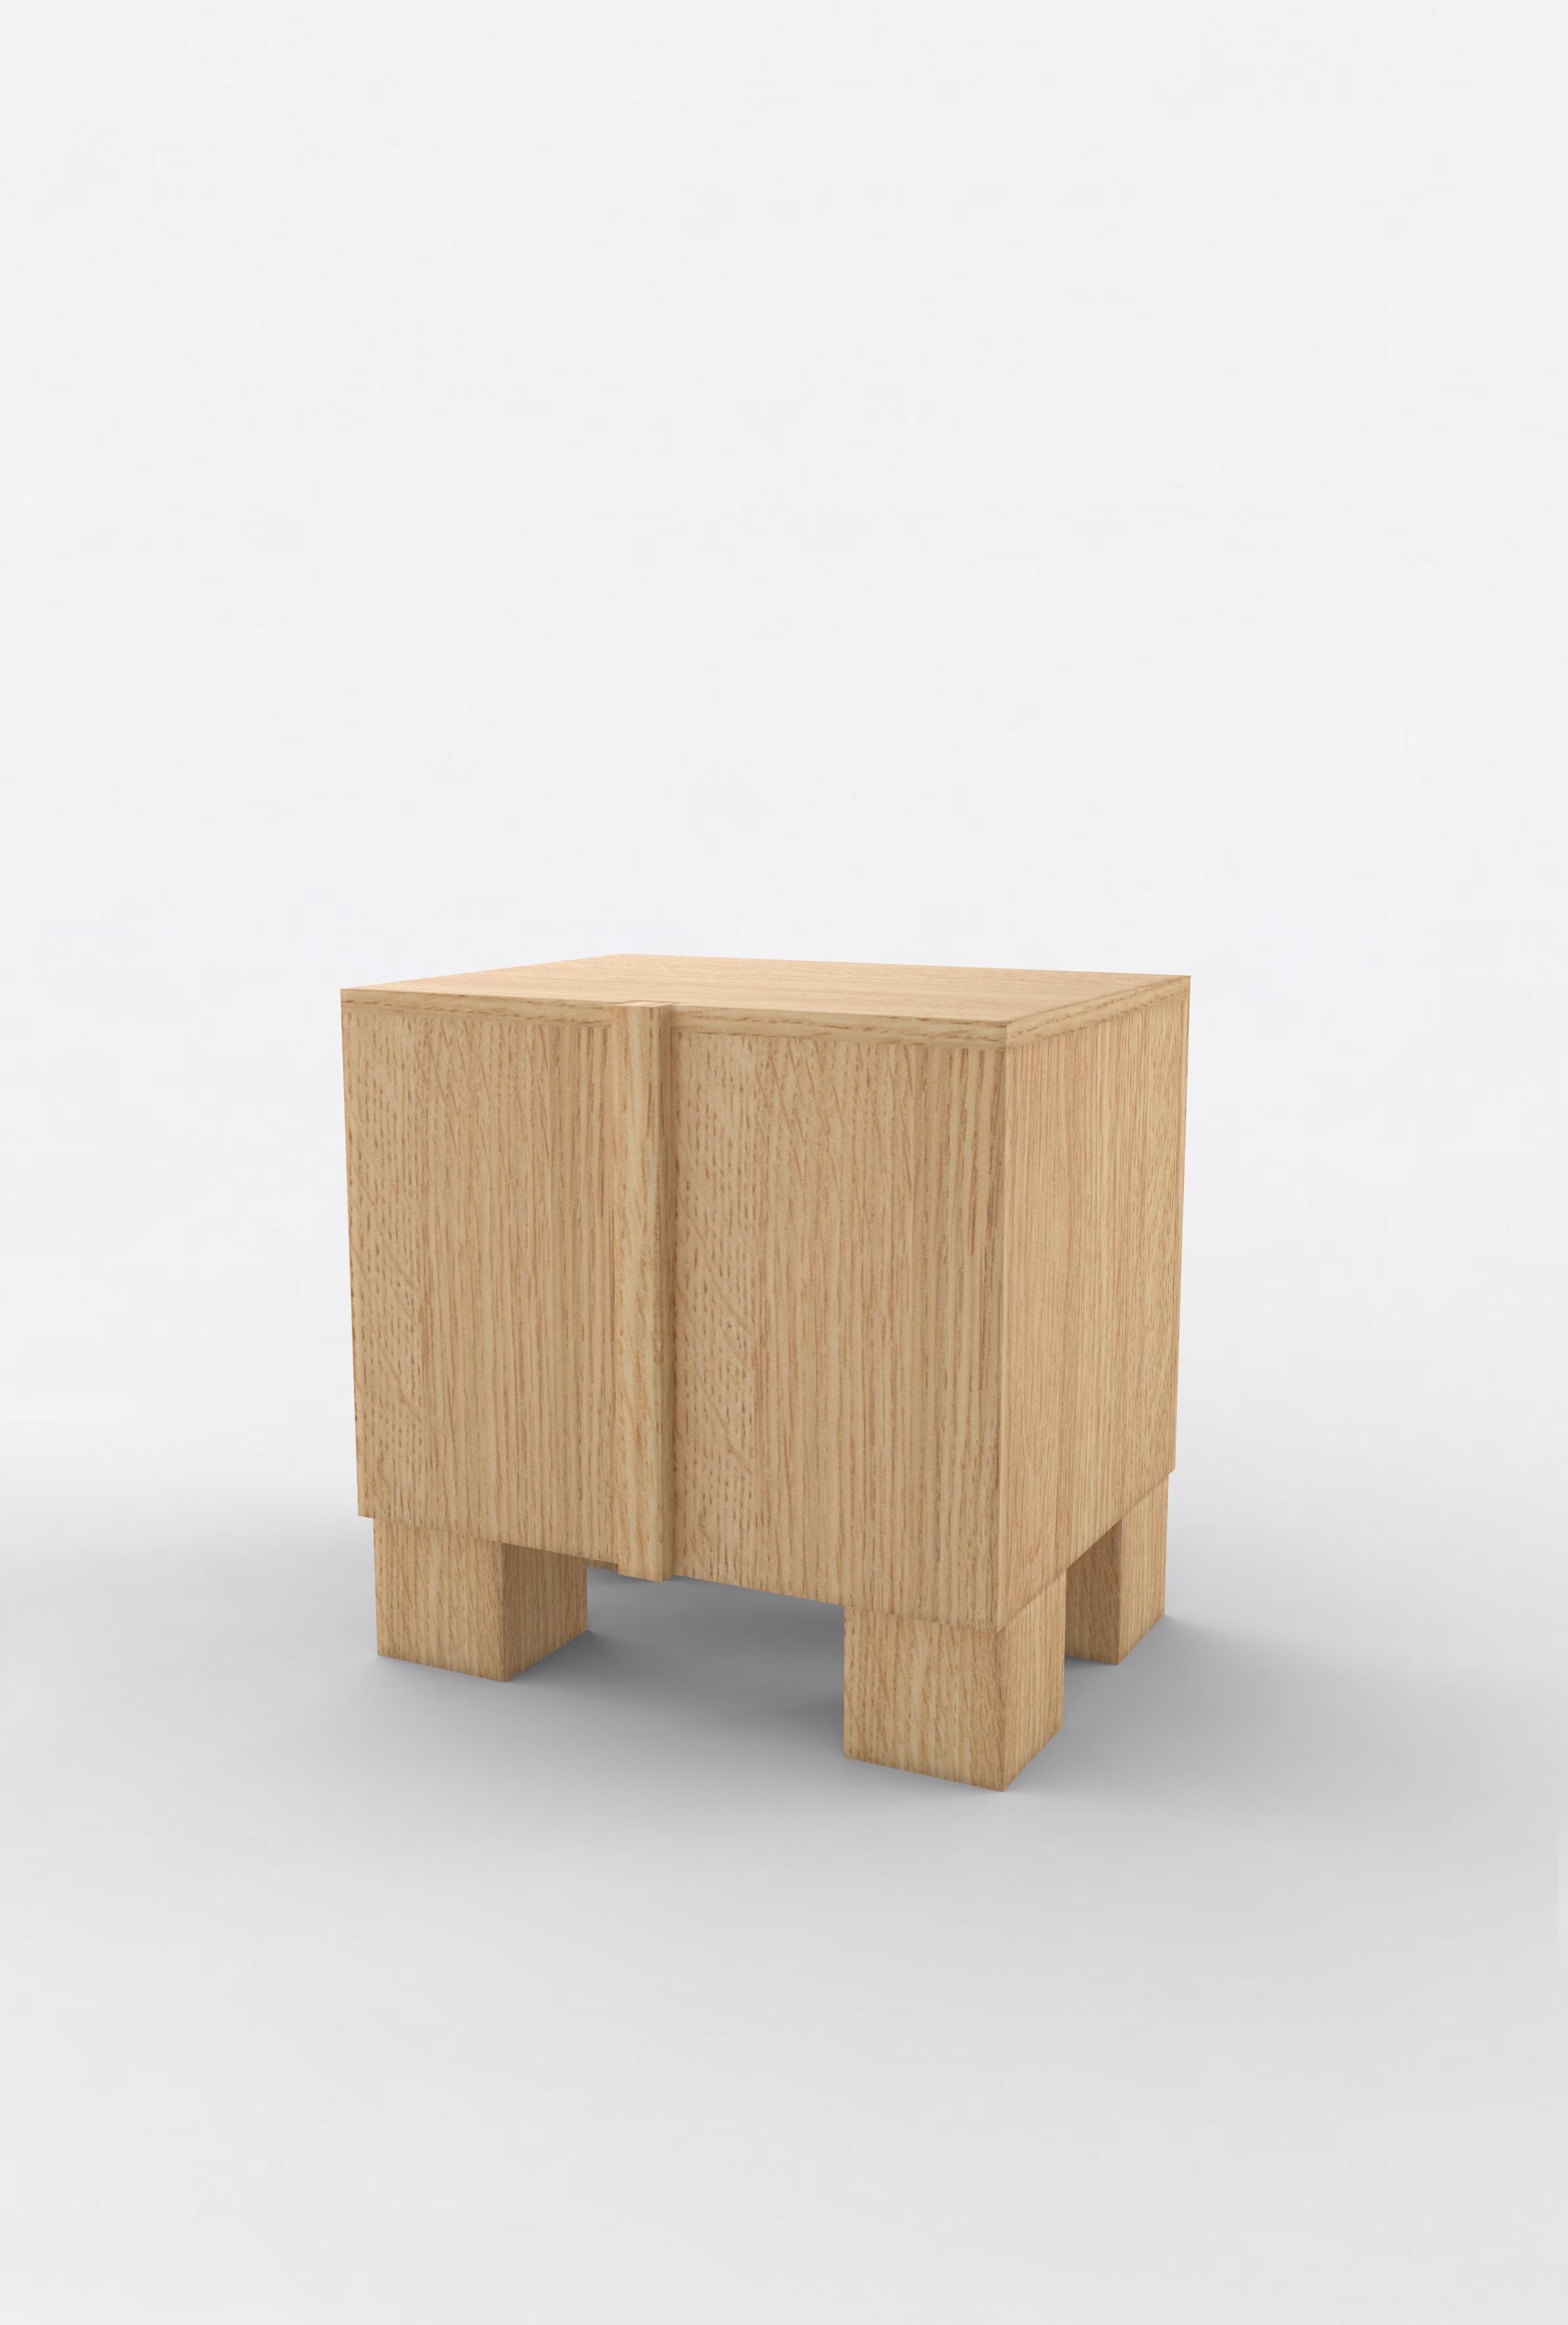 Orphan Work 100 Bedside
Shown in oak.
Available in natural oak.
Measures: 24” W x 15” D x 22” H
2 doors with adjustable shelves. 

Orphan work is designed to complement in the heart of Soho, New York City. Each piece is handmade in New York and Los